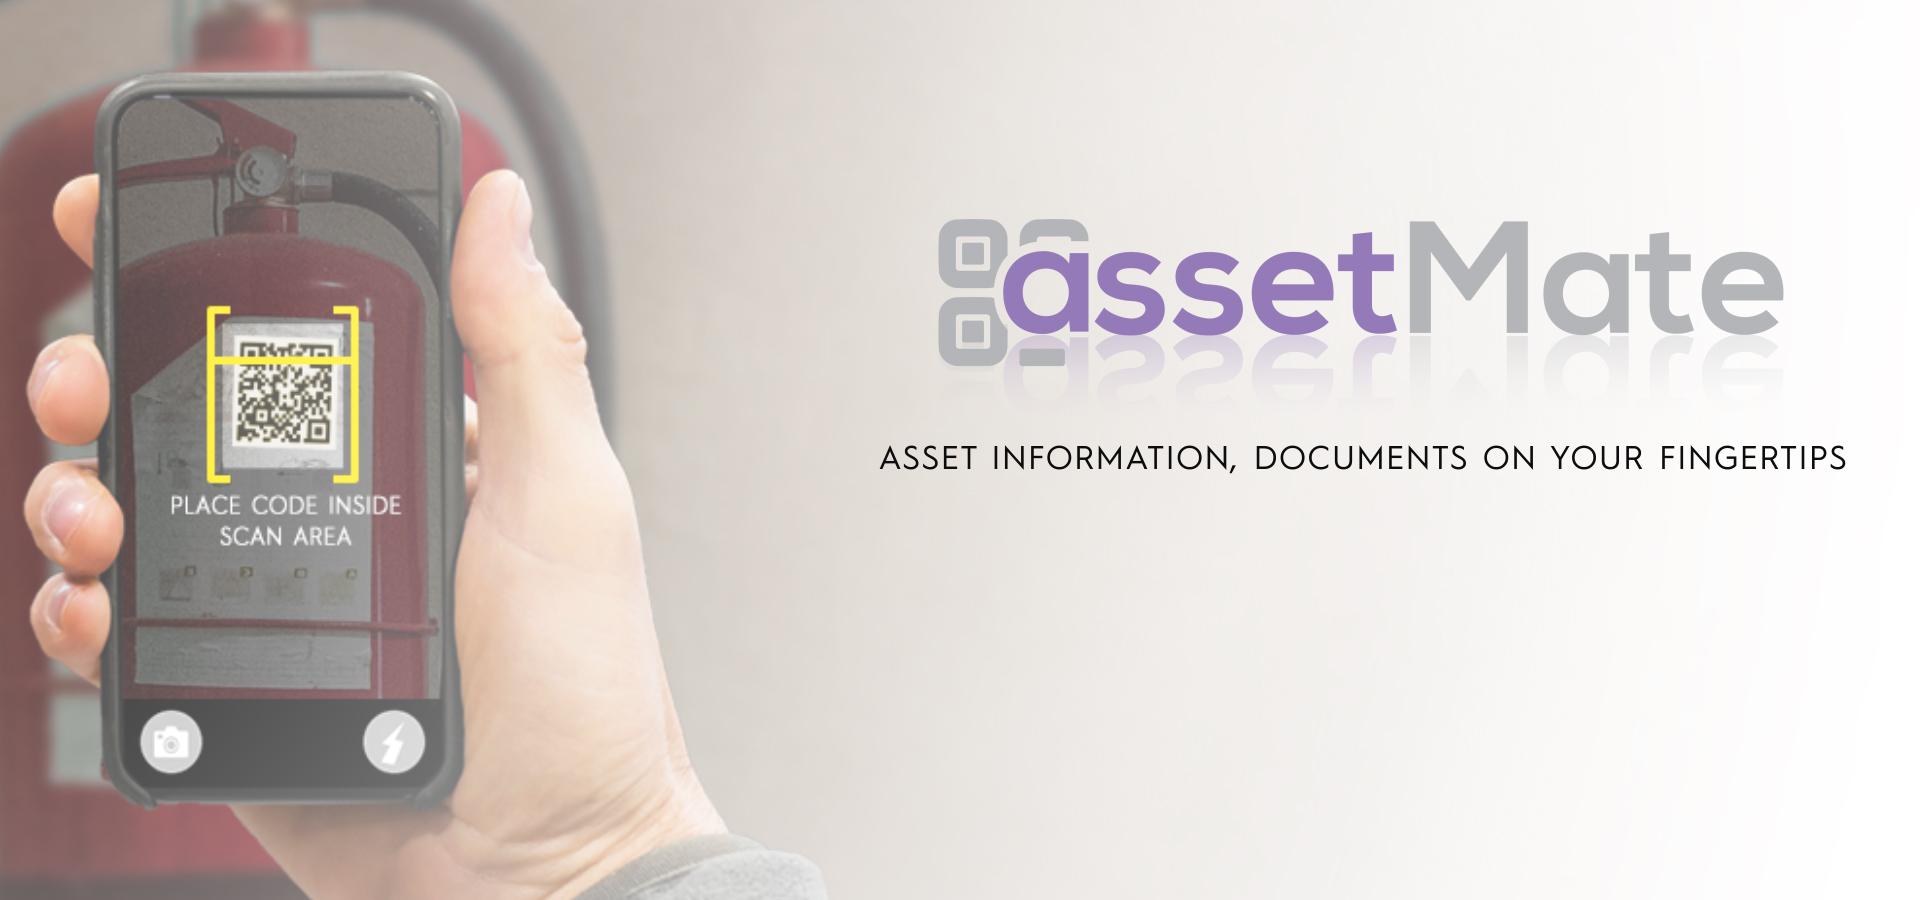 AssetMate Banner, scan QR code to get access to asset documents and audit data